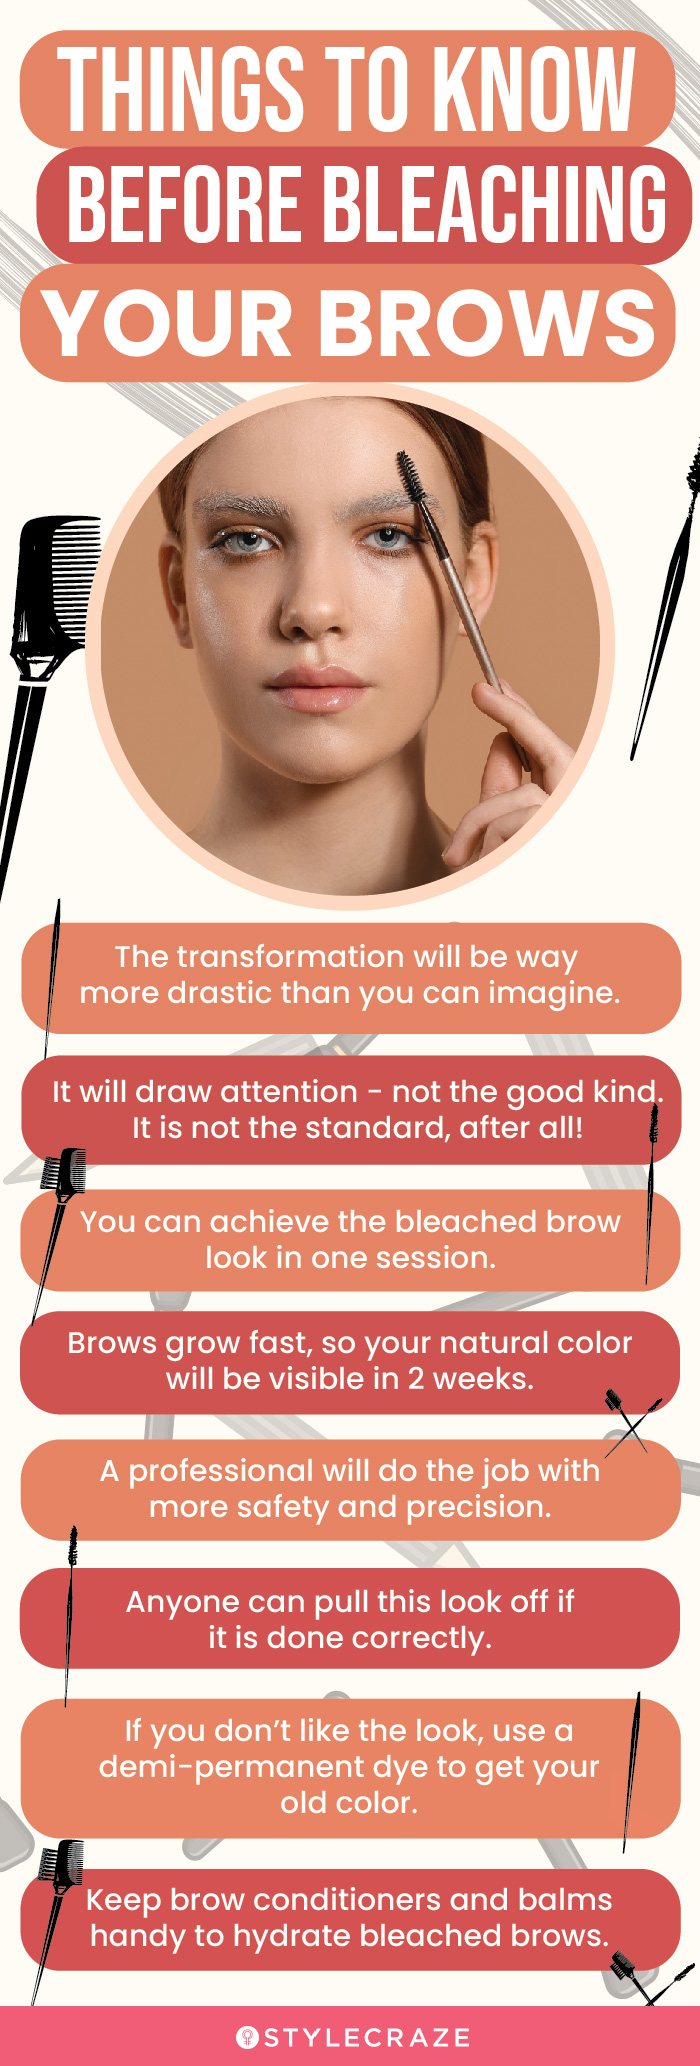 things to know before bleaching your brows (infographic)